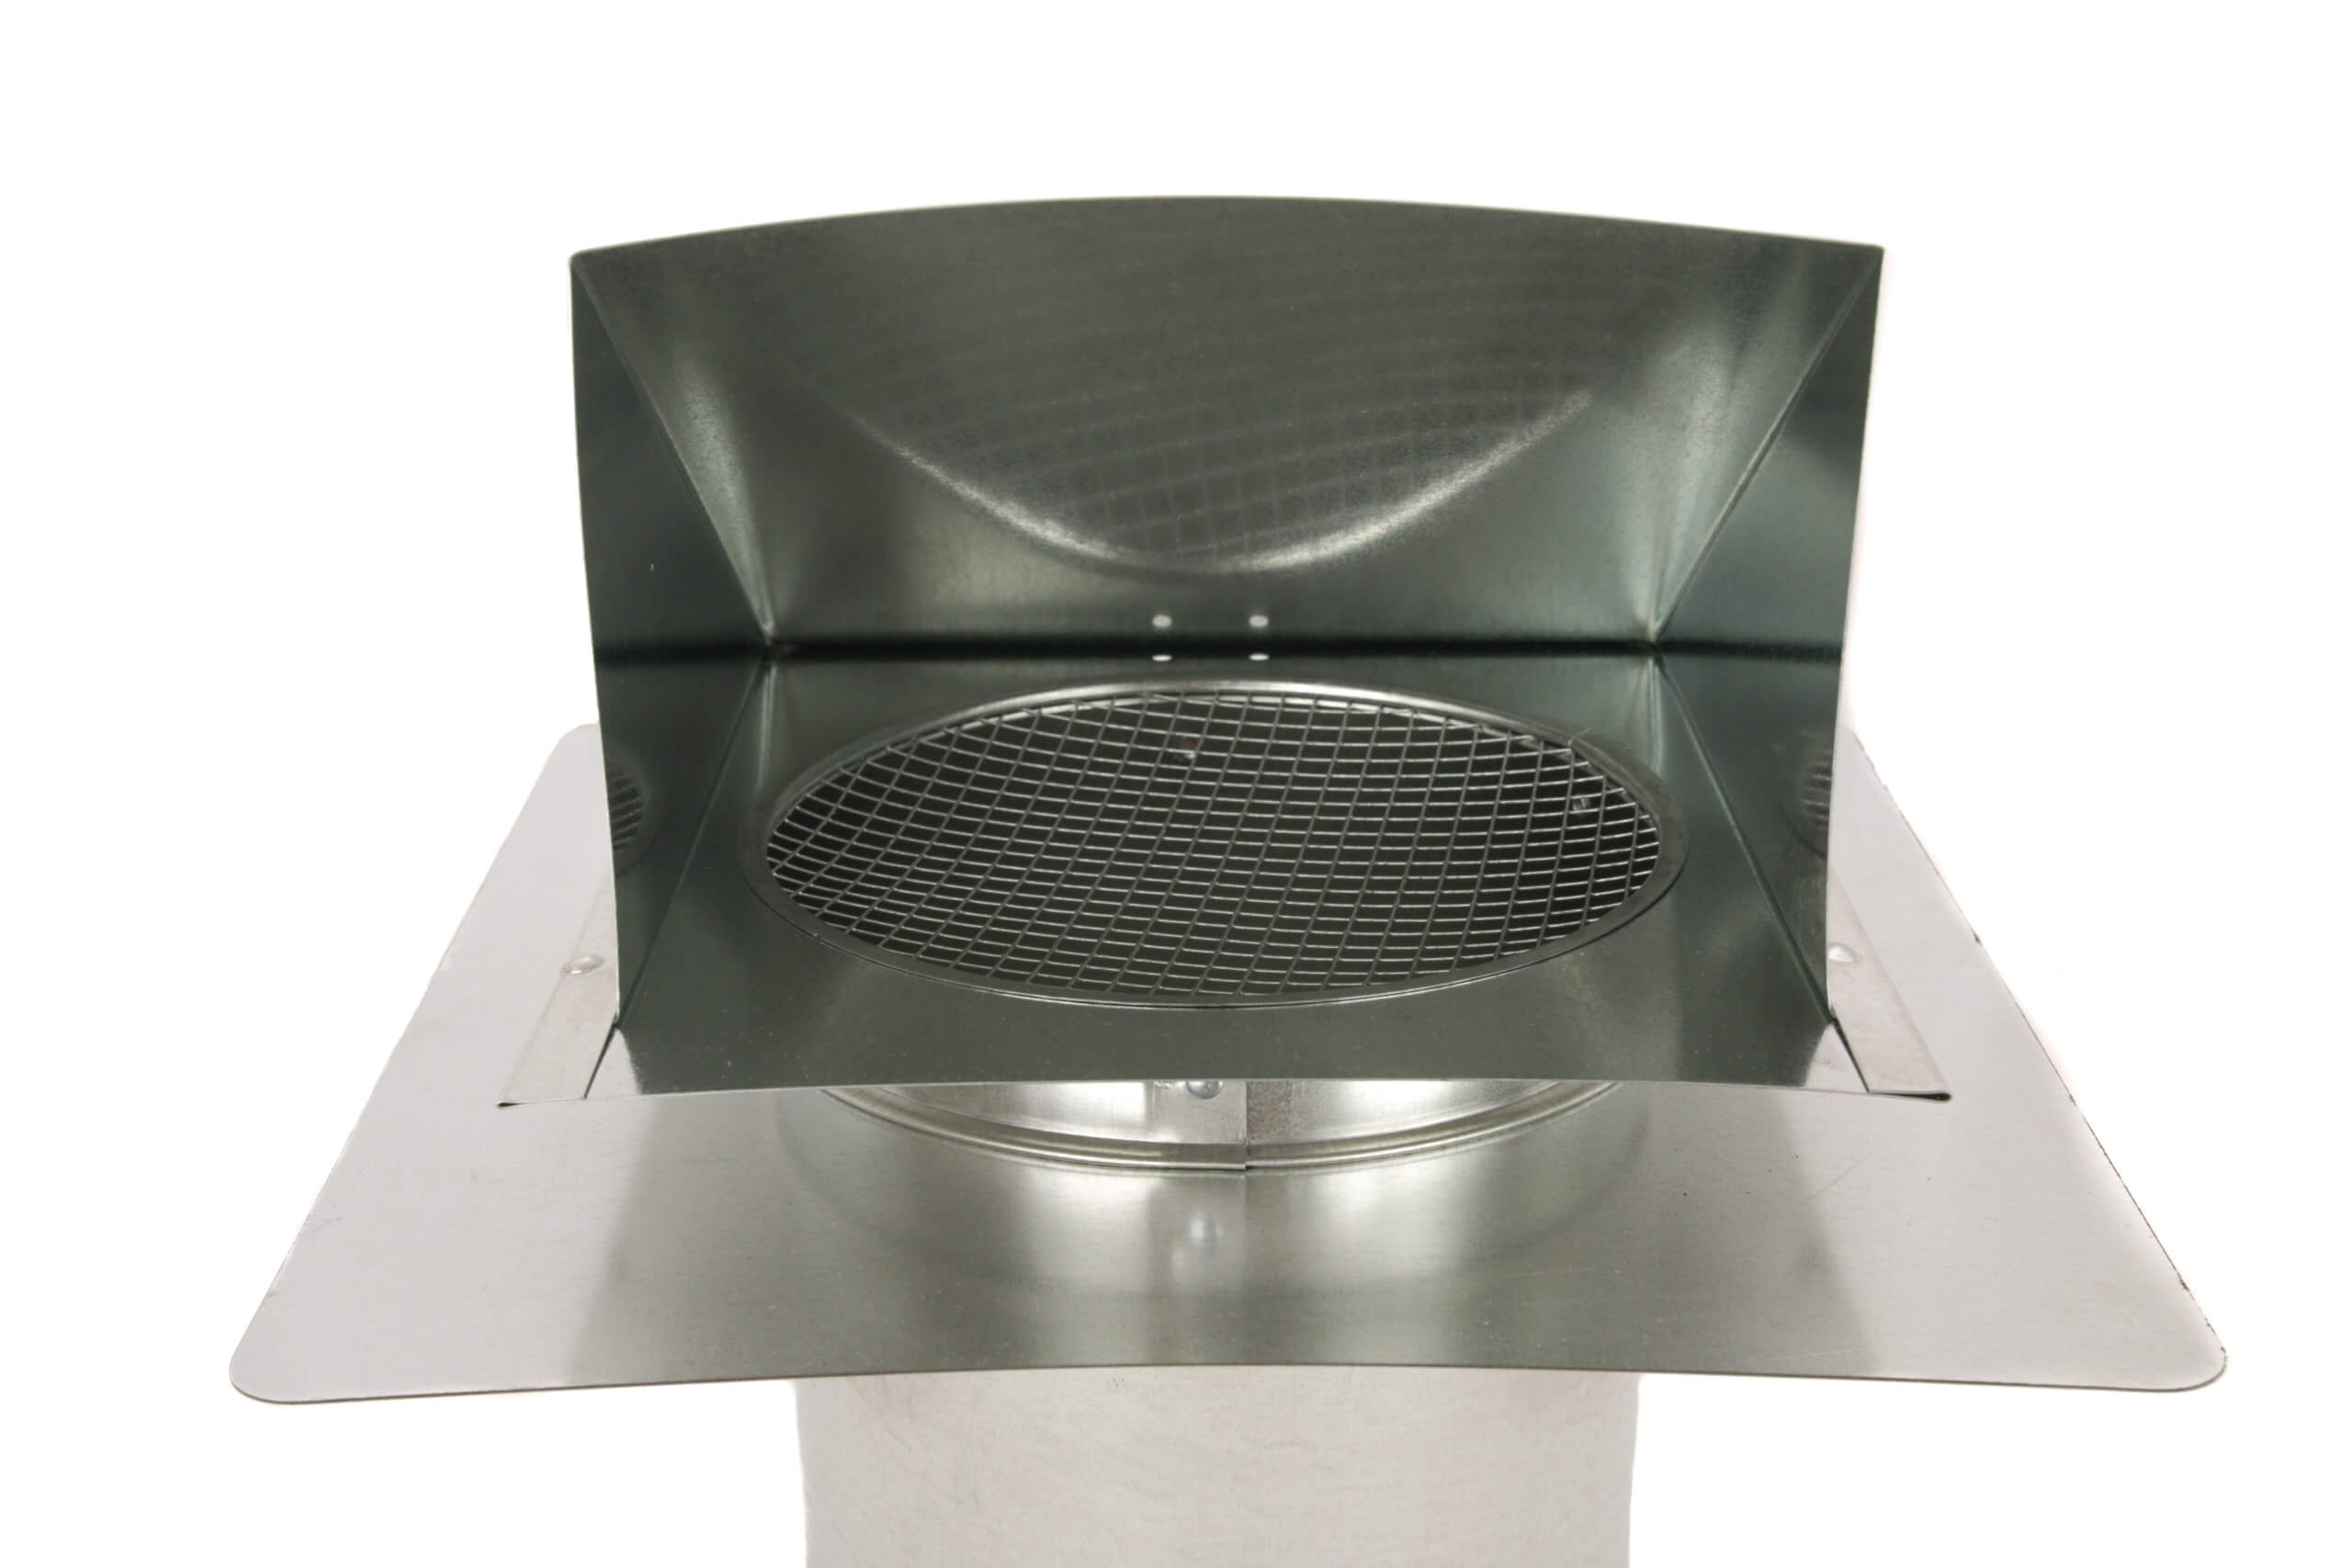 FAMCO Hooded Wall Vent with Screen & Stucco Ring (No Damper) - Galvanized Steel (Front View)